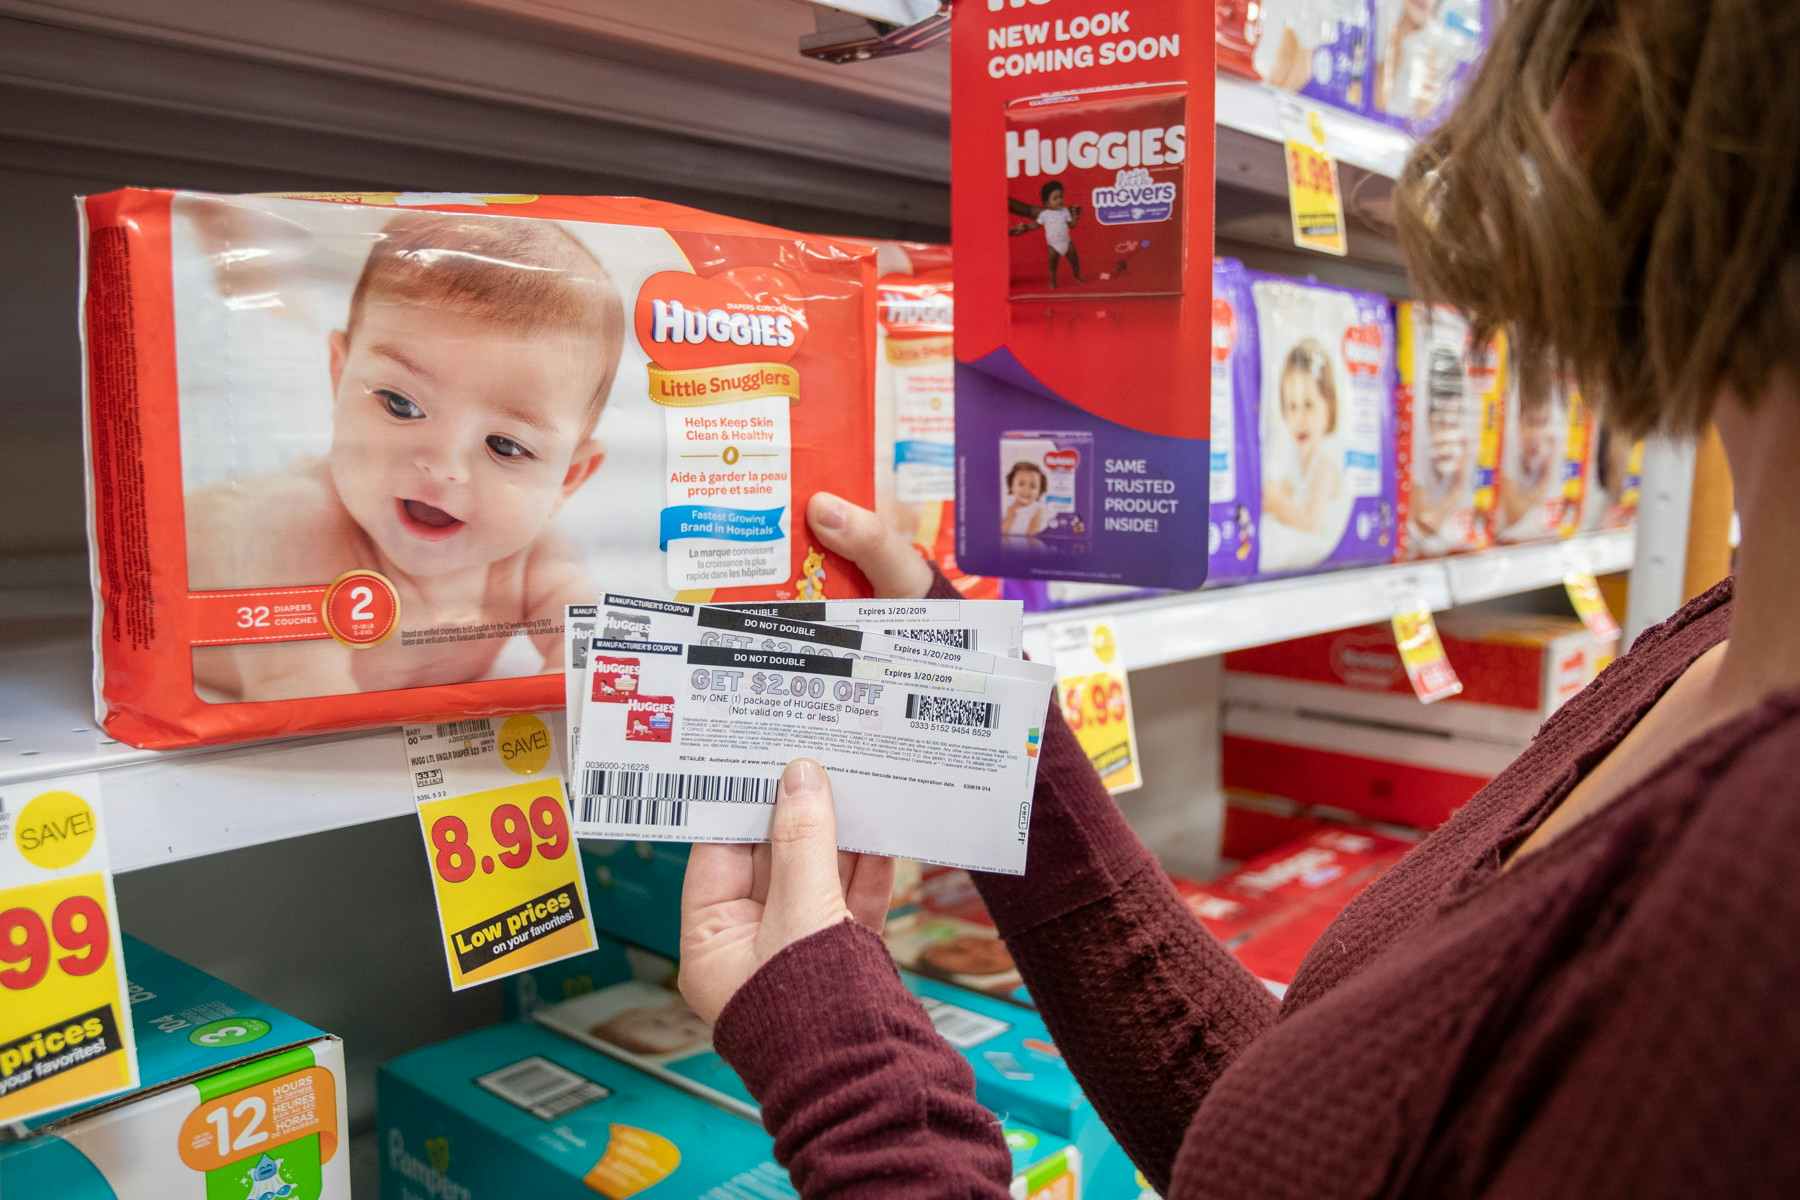 A woman holding Huggies coupons near diapers on display in a store